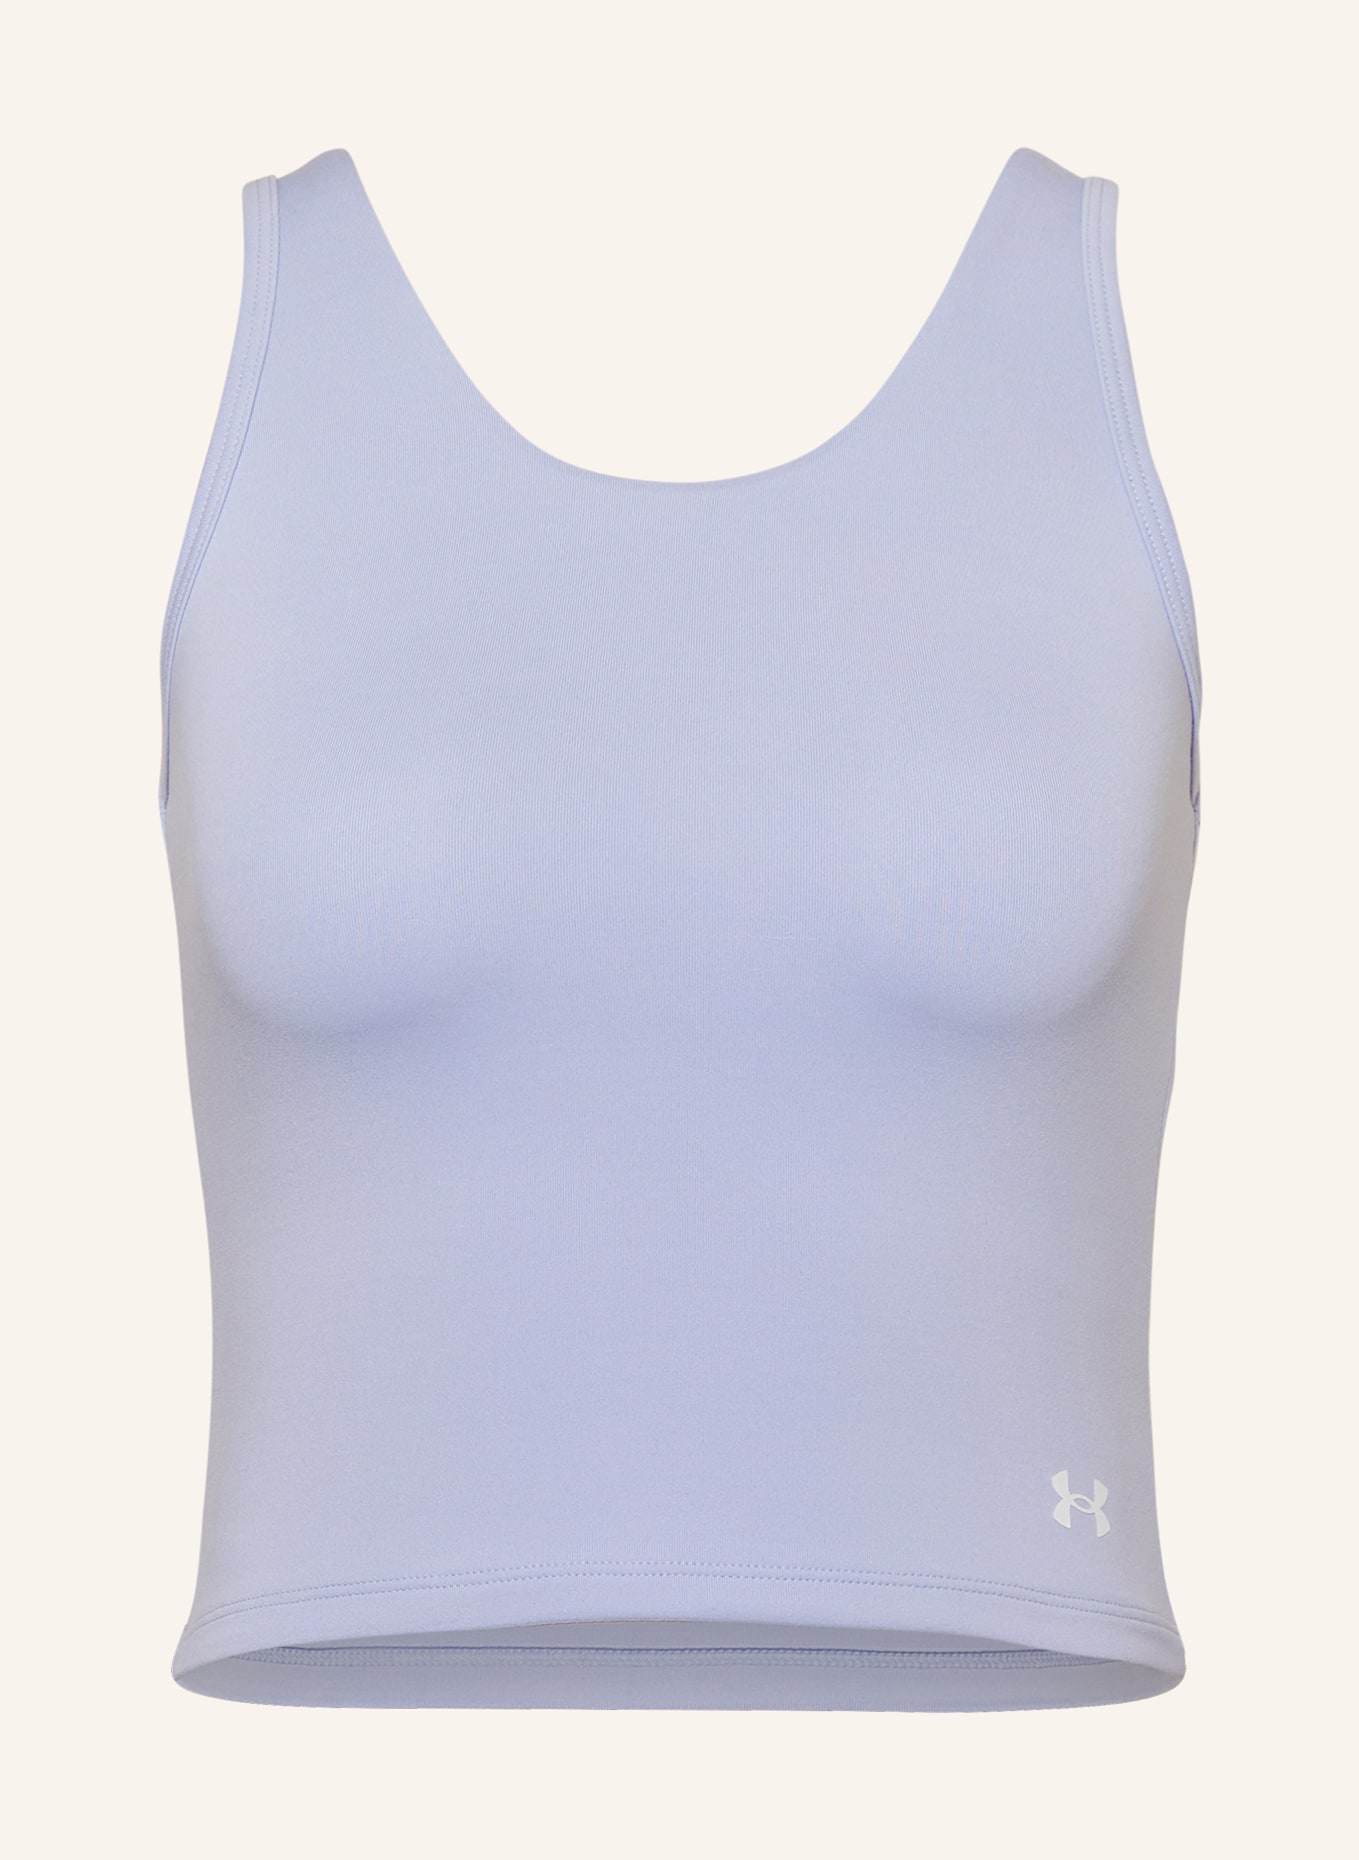 UNDER ARMOUR Cropped-Top UA MOTION, Farbe: HELLLILA (Bild 1)